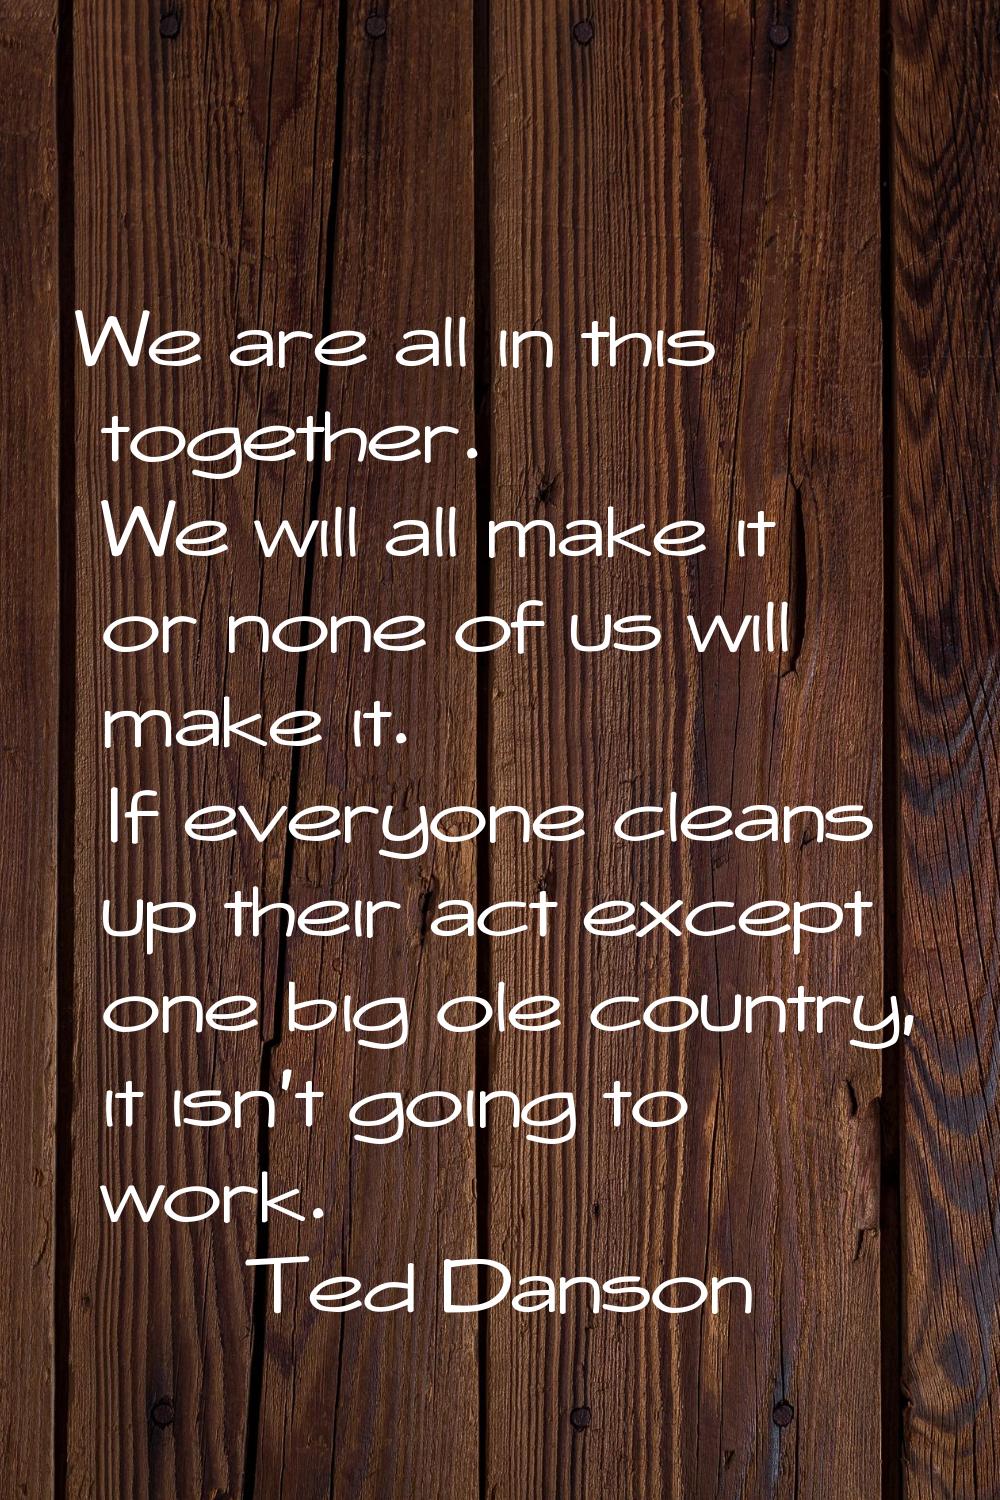 We are all in this together. We will all make it or none of us will make it. If everyone cleans up 